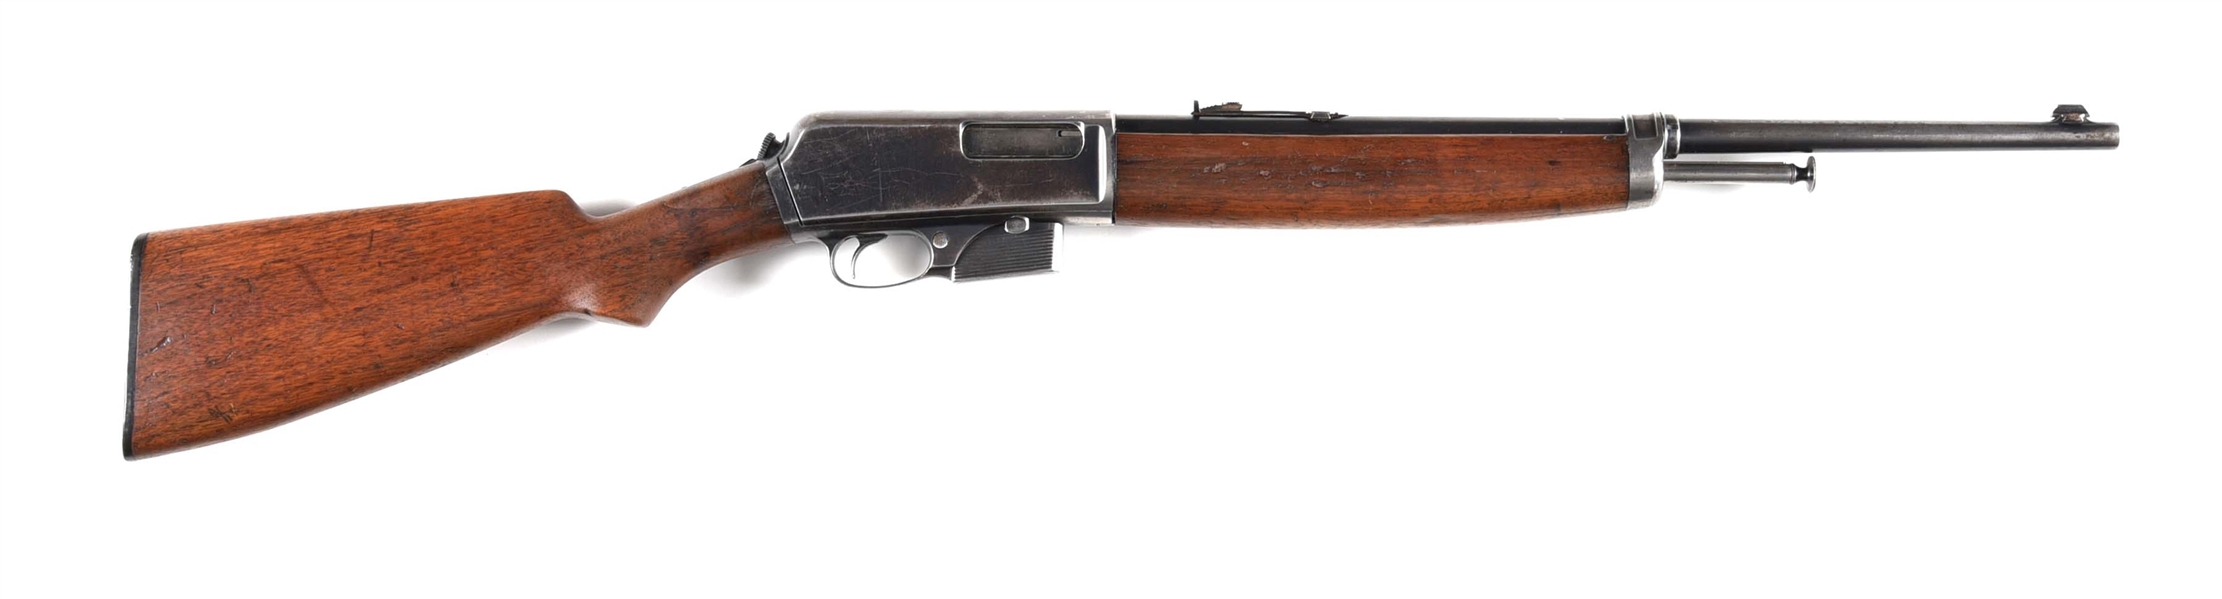 (C) WINCHESTER MODEL 1910 .401 SEMI AUTOMATIC RIFLE SERIAL NUMBER 12